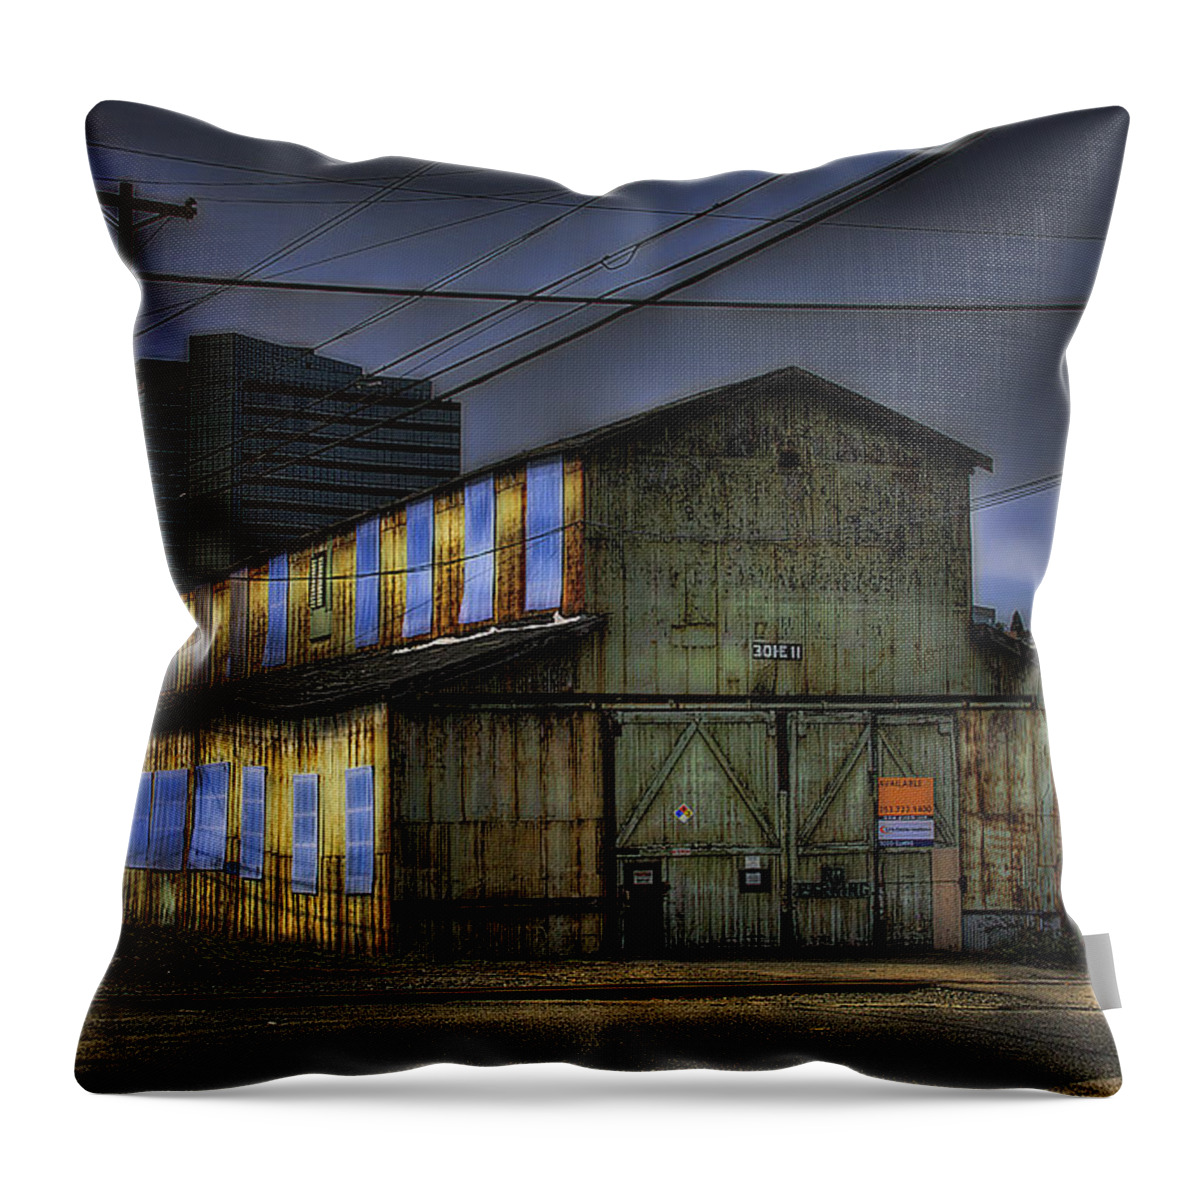 Building Throw Pillow featuring the photograph Tacoma Warehouse by David Patterson